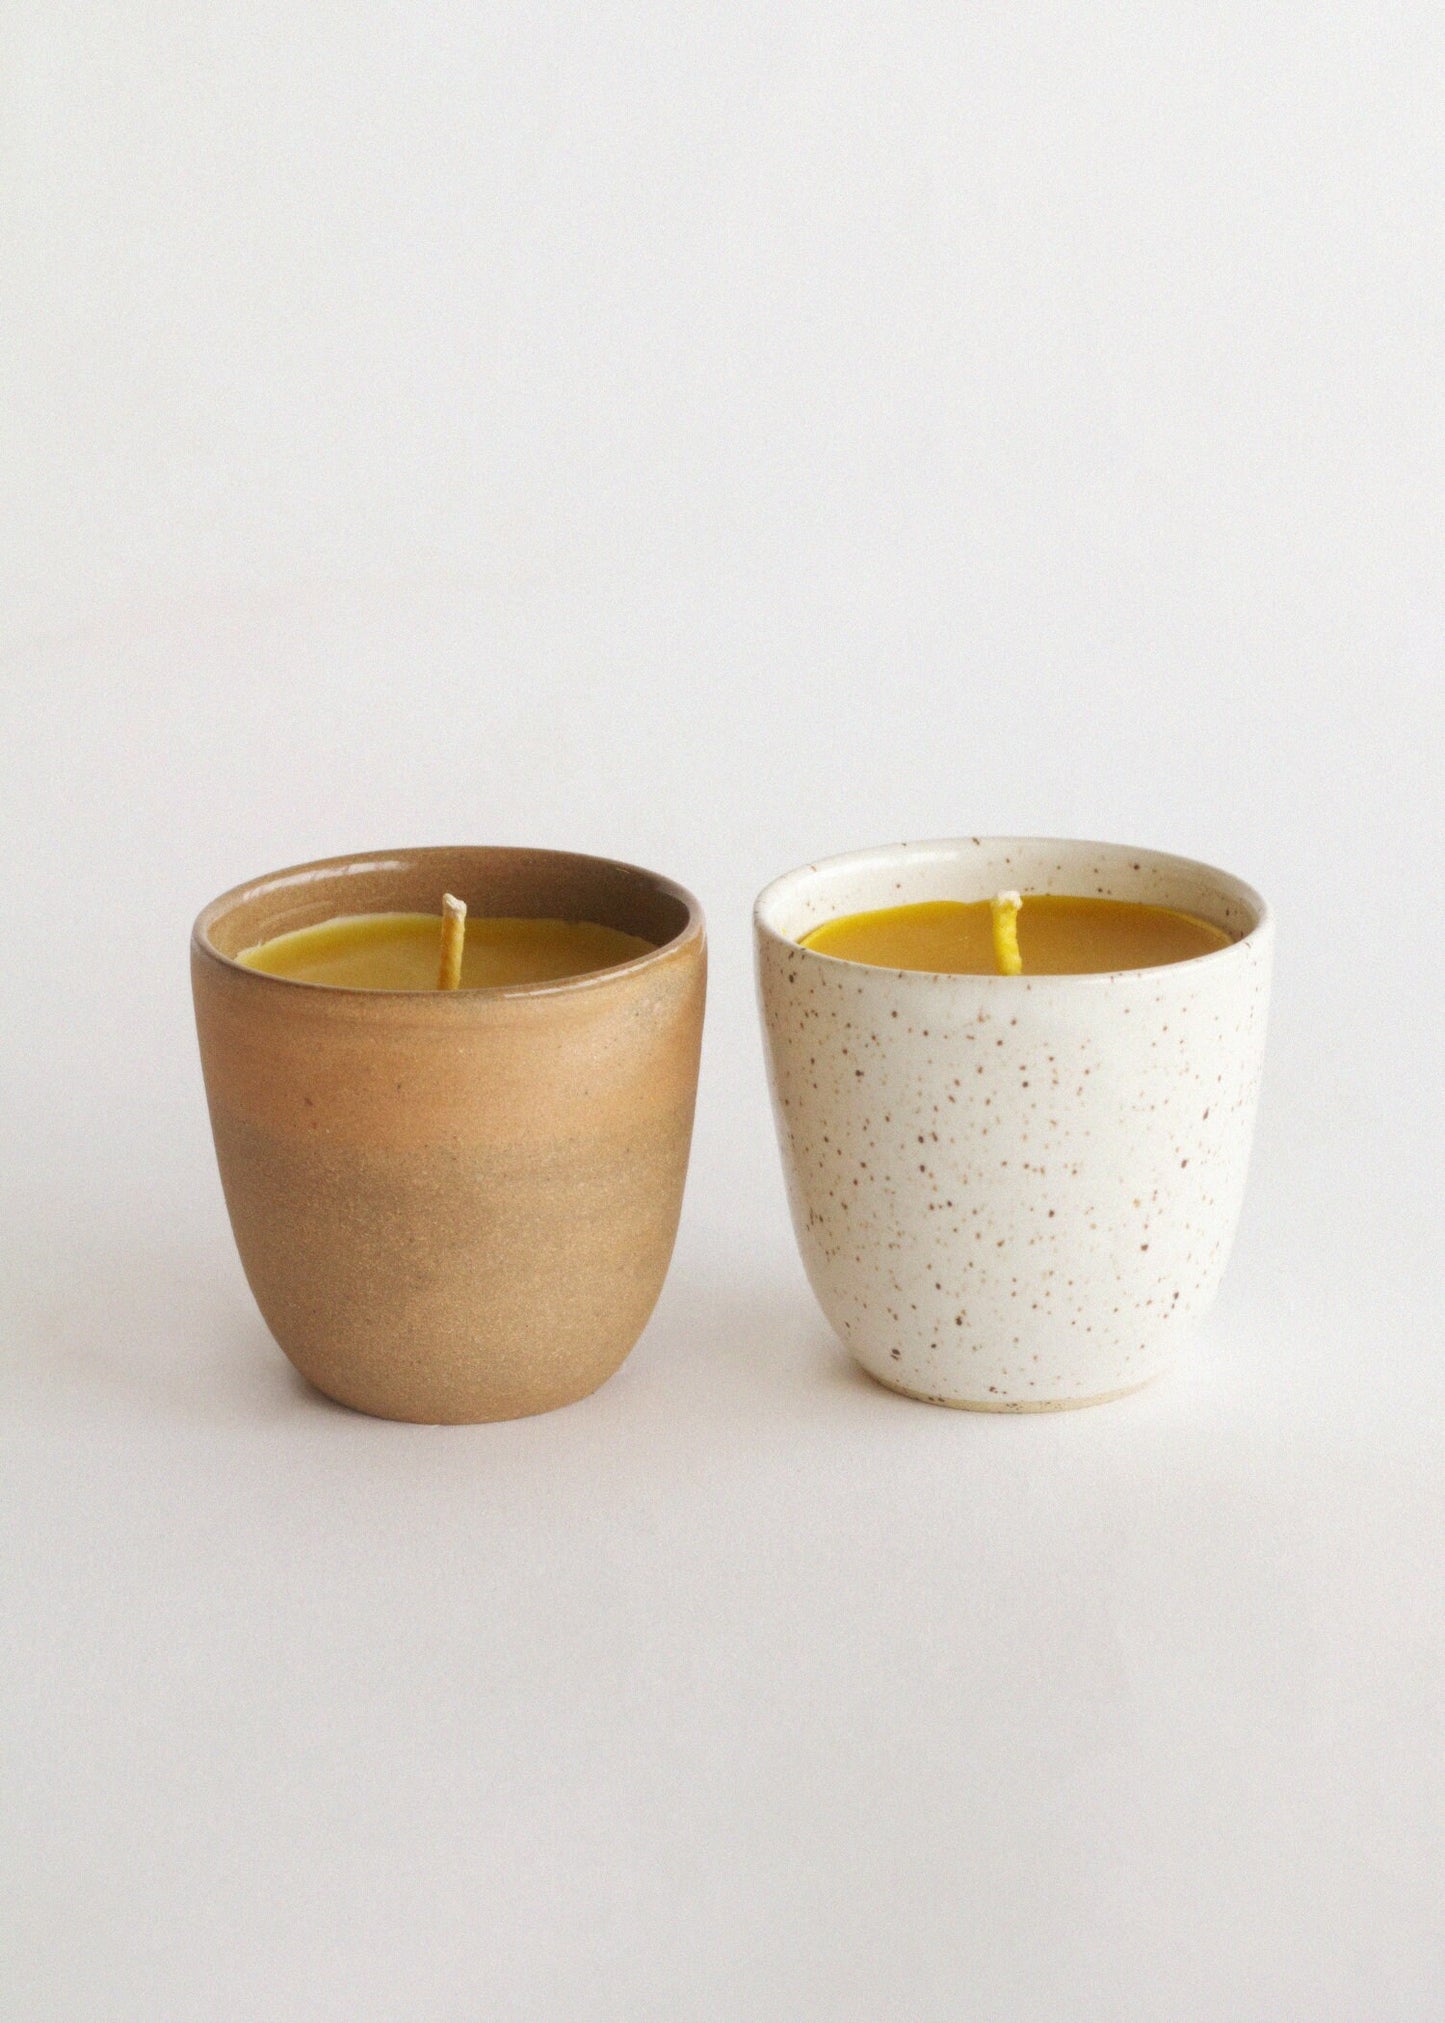 Terracotta Beeswax Candle - Tumbler - 5 oz. Stoneware Cup in Brown or White- Beeswax Candle - Hygge Home